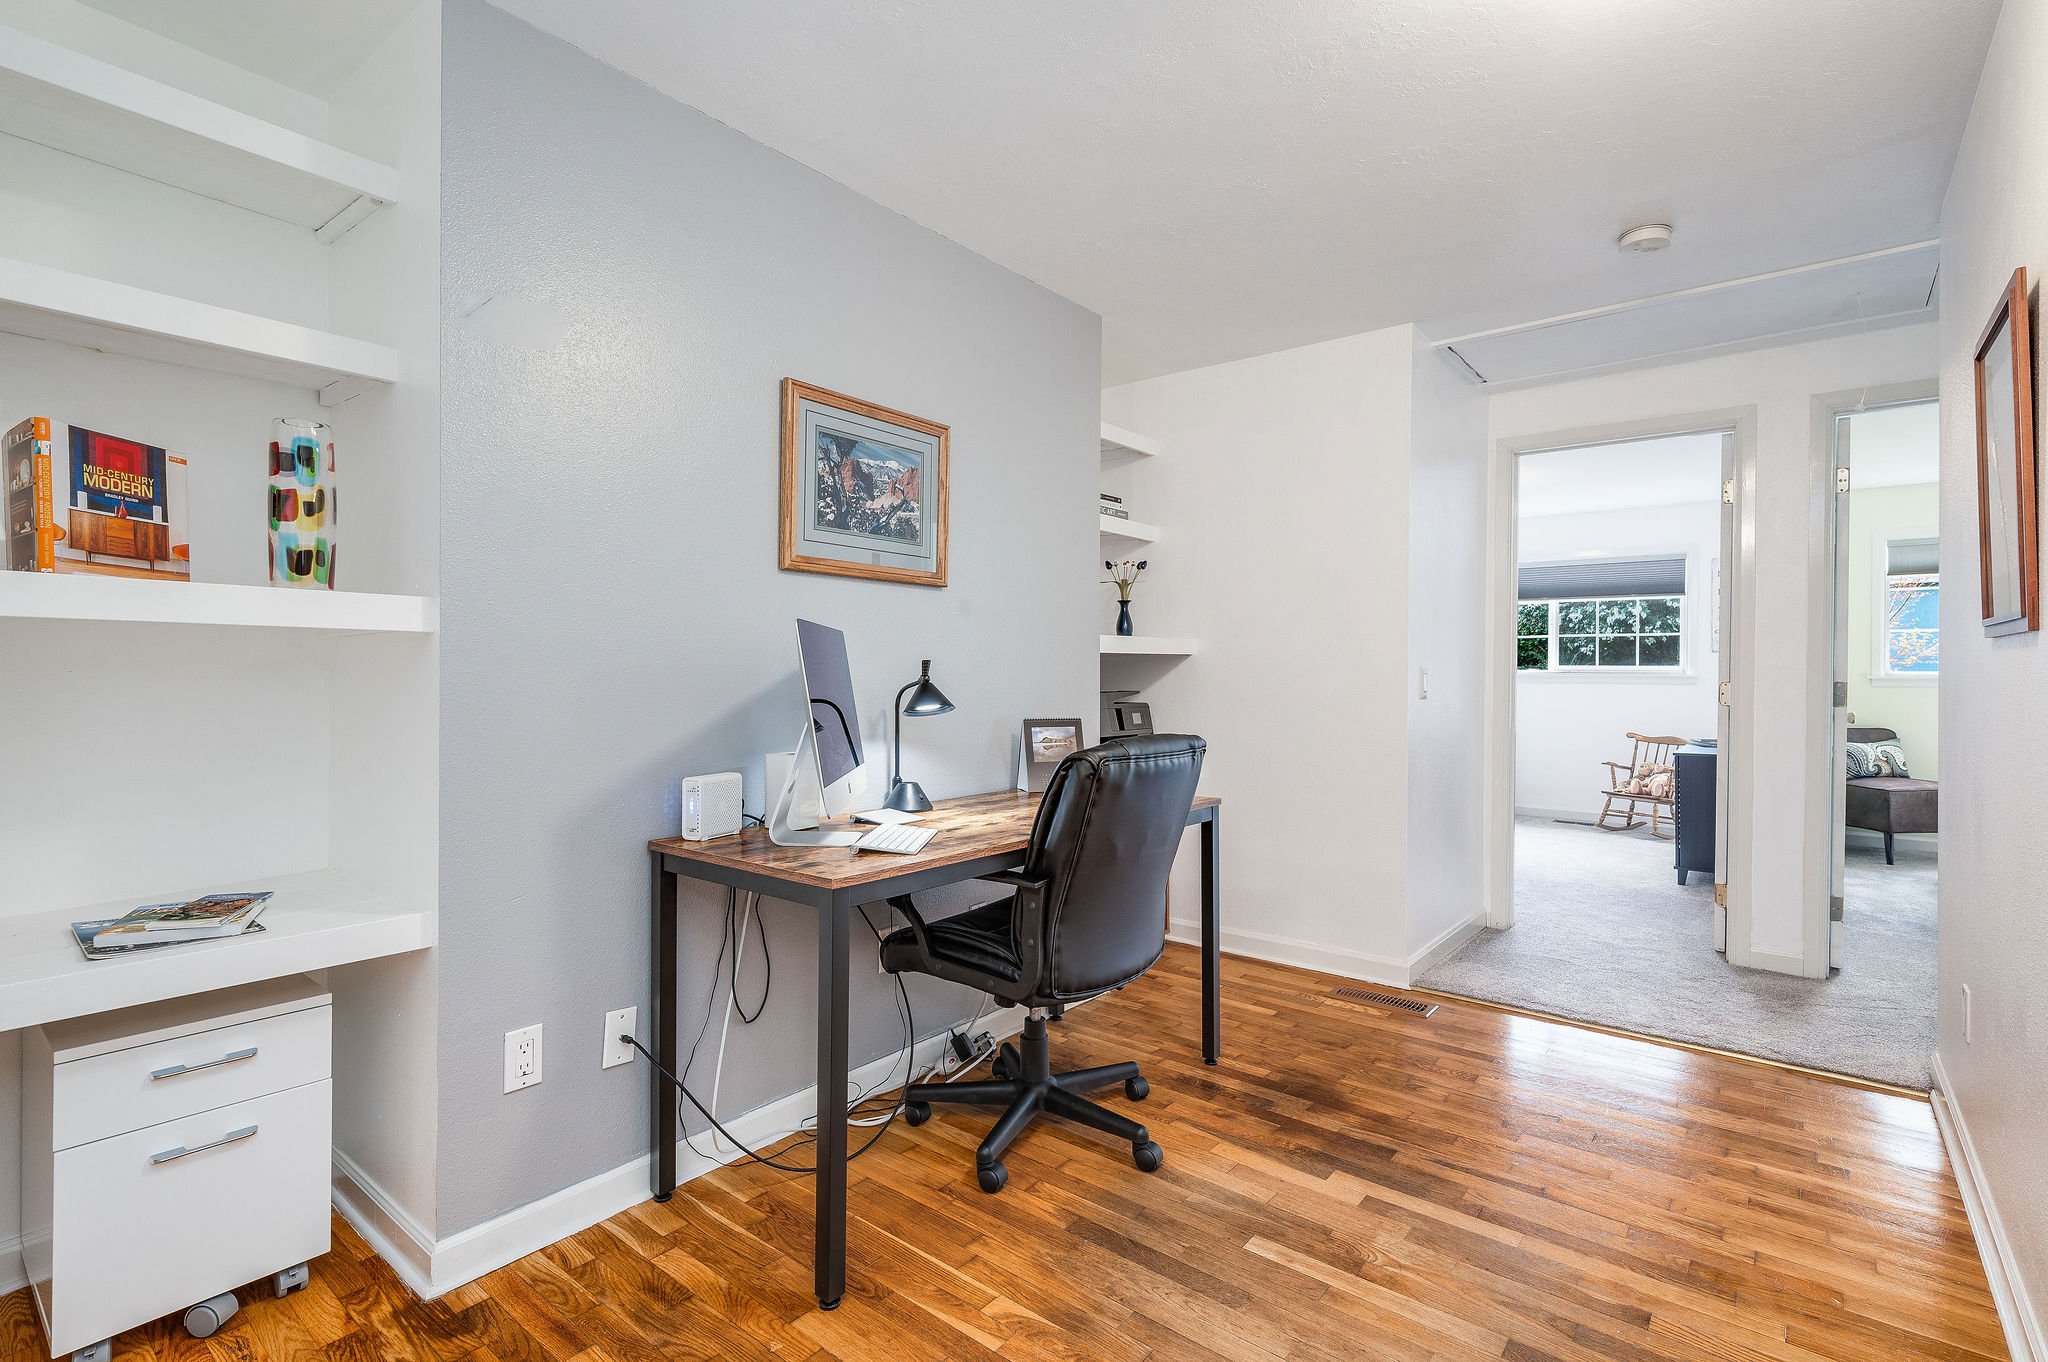 Dedicated office space with built-in shelves and a full-sized coat closet.